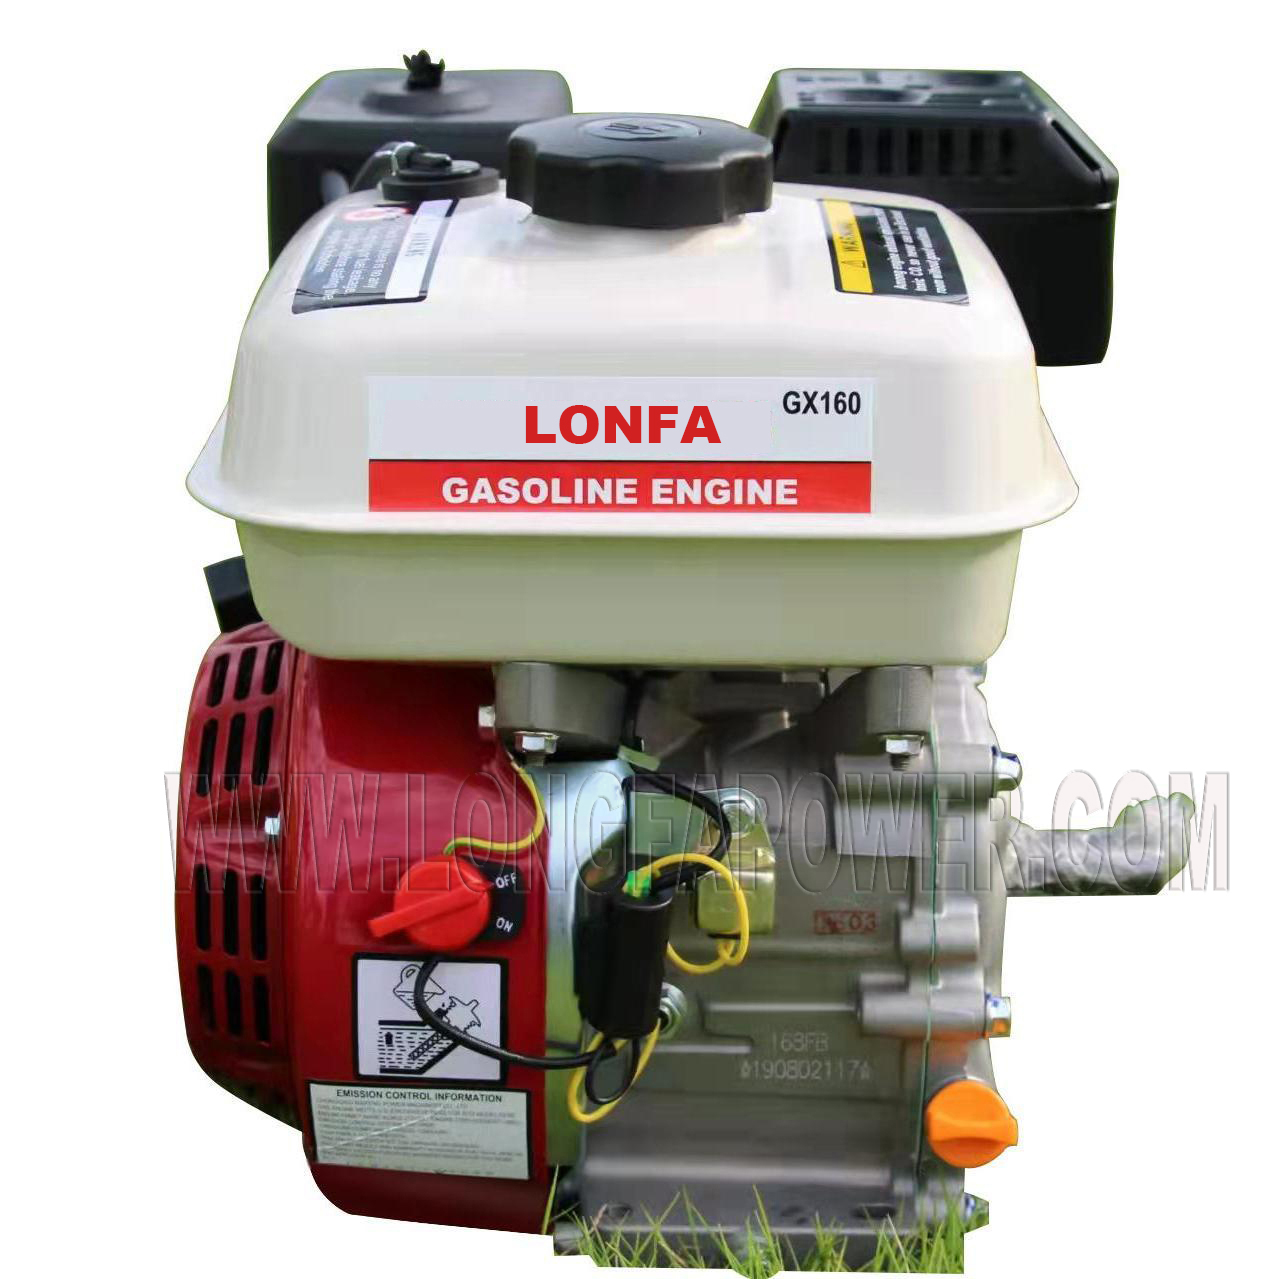 Gx160 Gx200 Gx240 Gx390 Gx420 5HP 6HP 7HP 13HP 15HP 4 Stroke Petrol Gasoline Engine for Generator or Water Pump